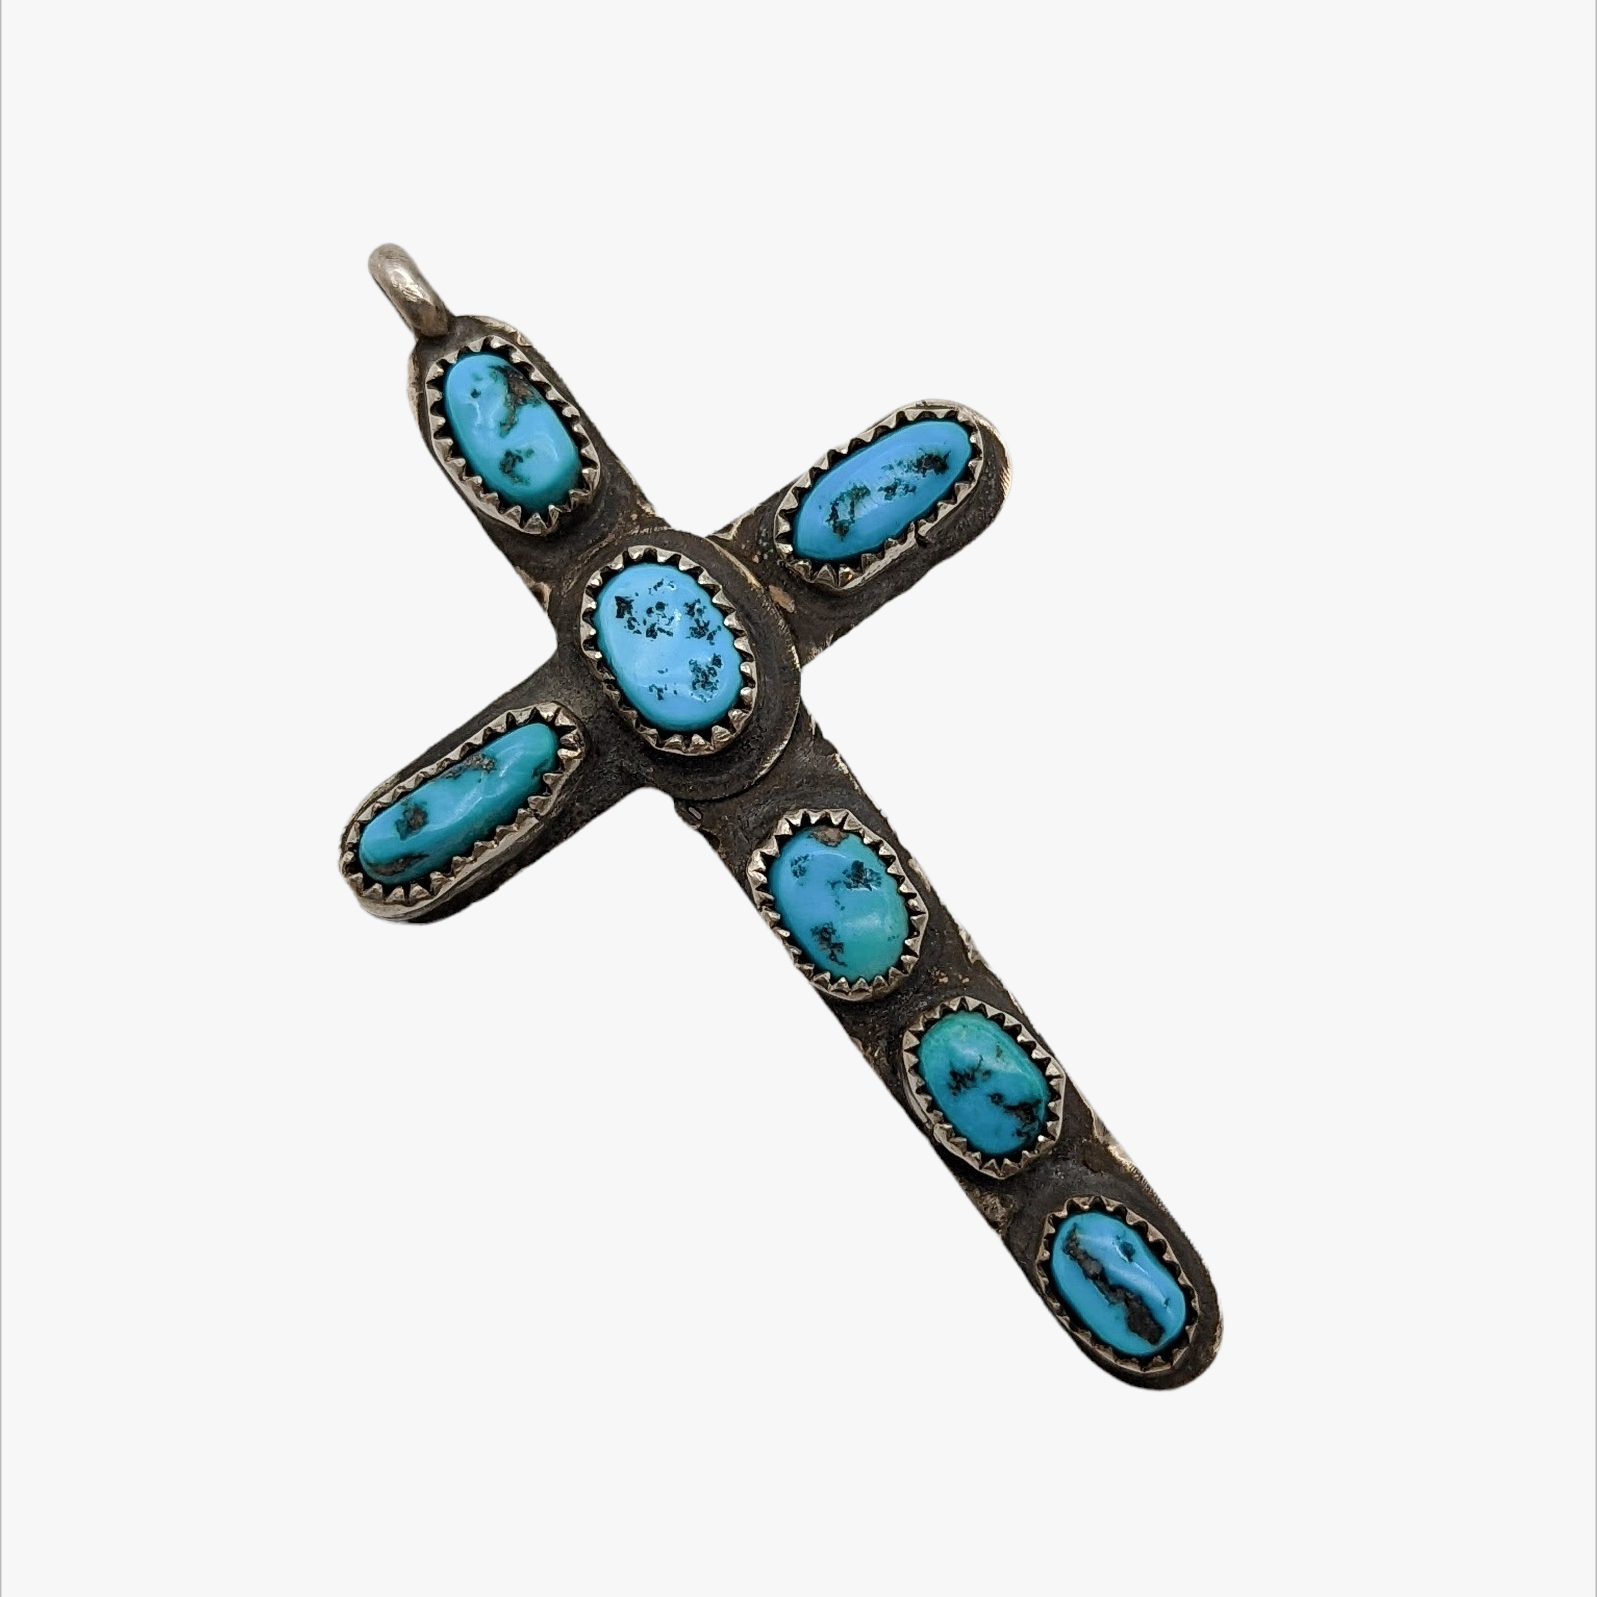 Vintage Sterling Silver Turquoise Large Cross Pendant